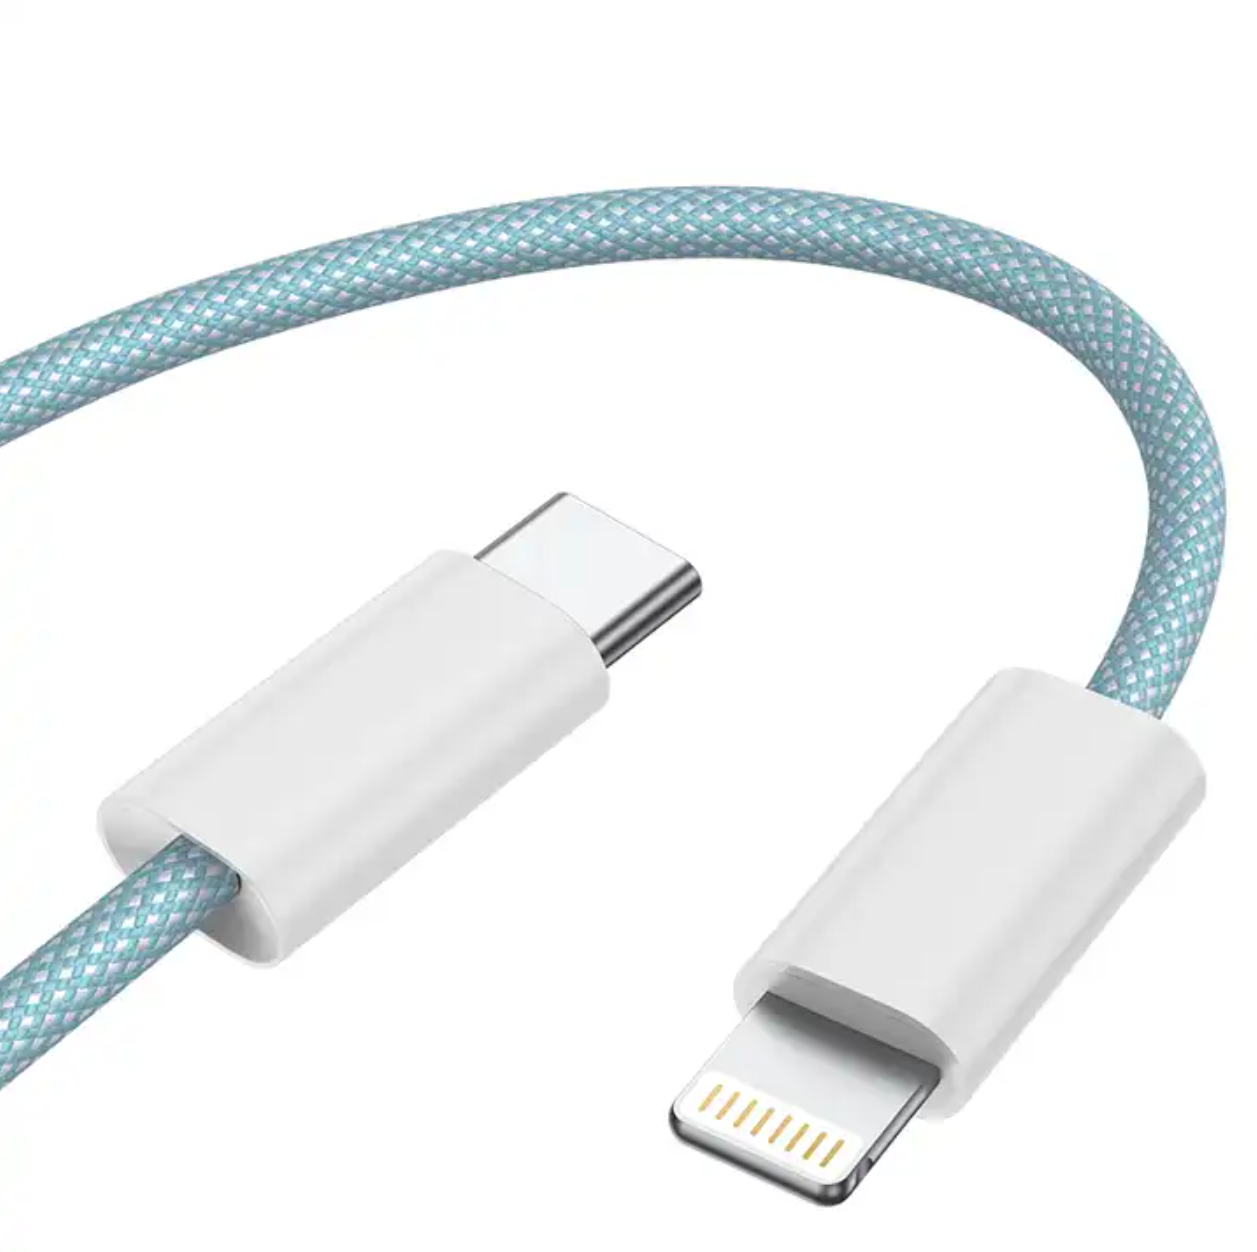 Yulian Apple charger data cable | C2L | 18W | 480Mbps | no video and audio | 1.2m